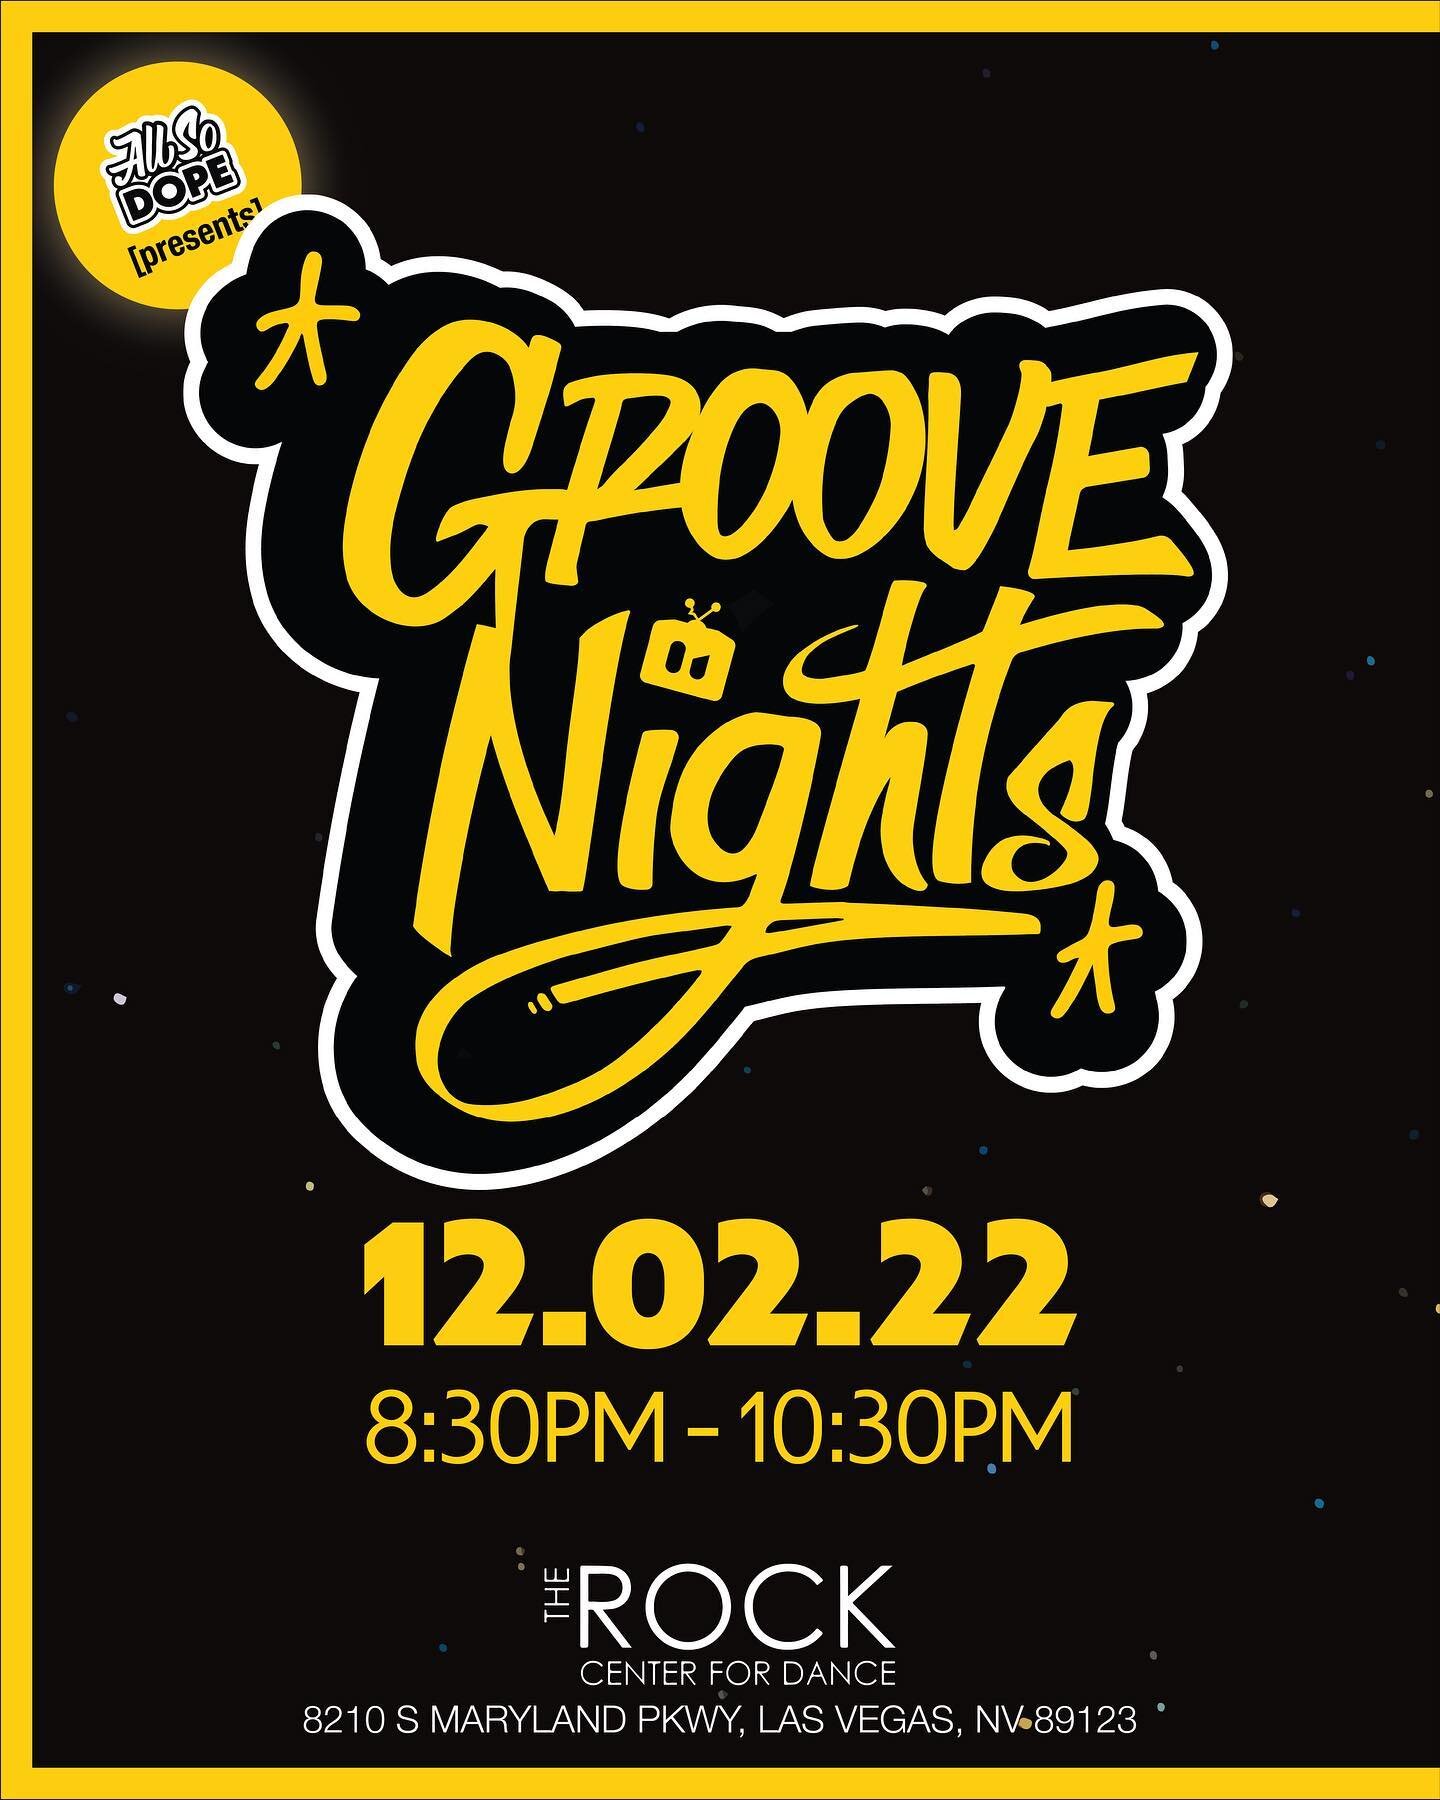 REGISTRATION IS NOW OPEN!
[Link in Bio]
www.allsodope.com/events

All So DOPE presents: Groove Nights 
12.02.22 | 8:30PM-10:30PM
@therockcenterfordance 

Hosted by Brandon Raphael &amp; Stephanie Giang
Featuring DJ Gouda @athegouda 

Sponsors
The DOP